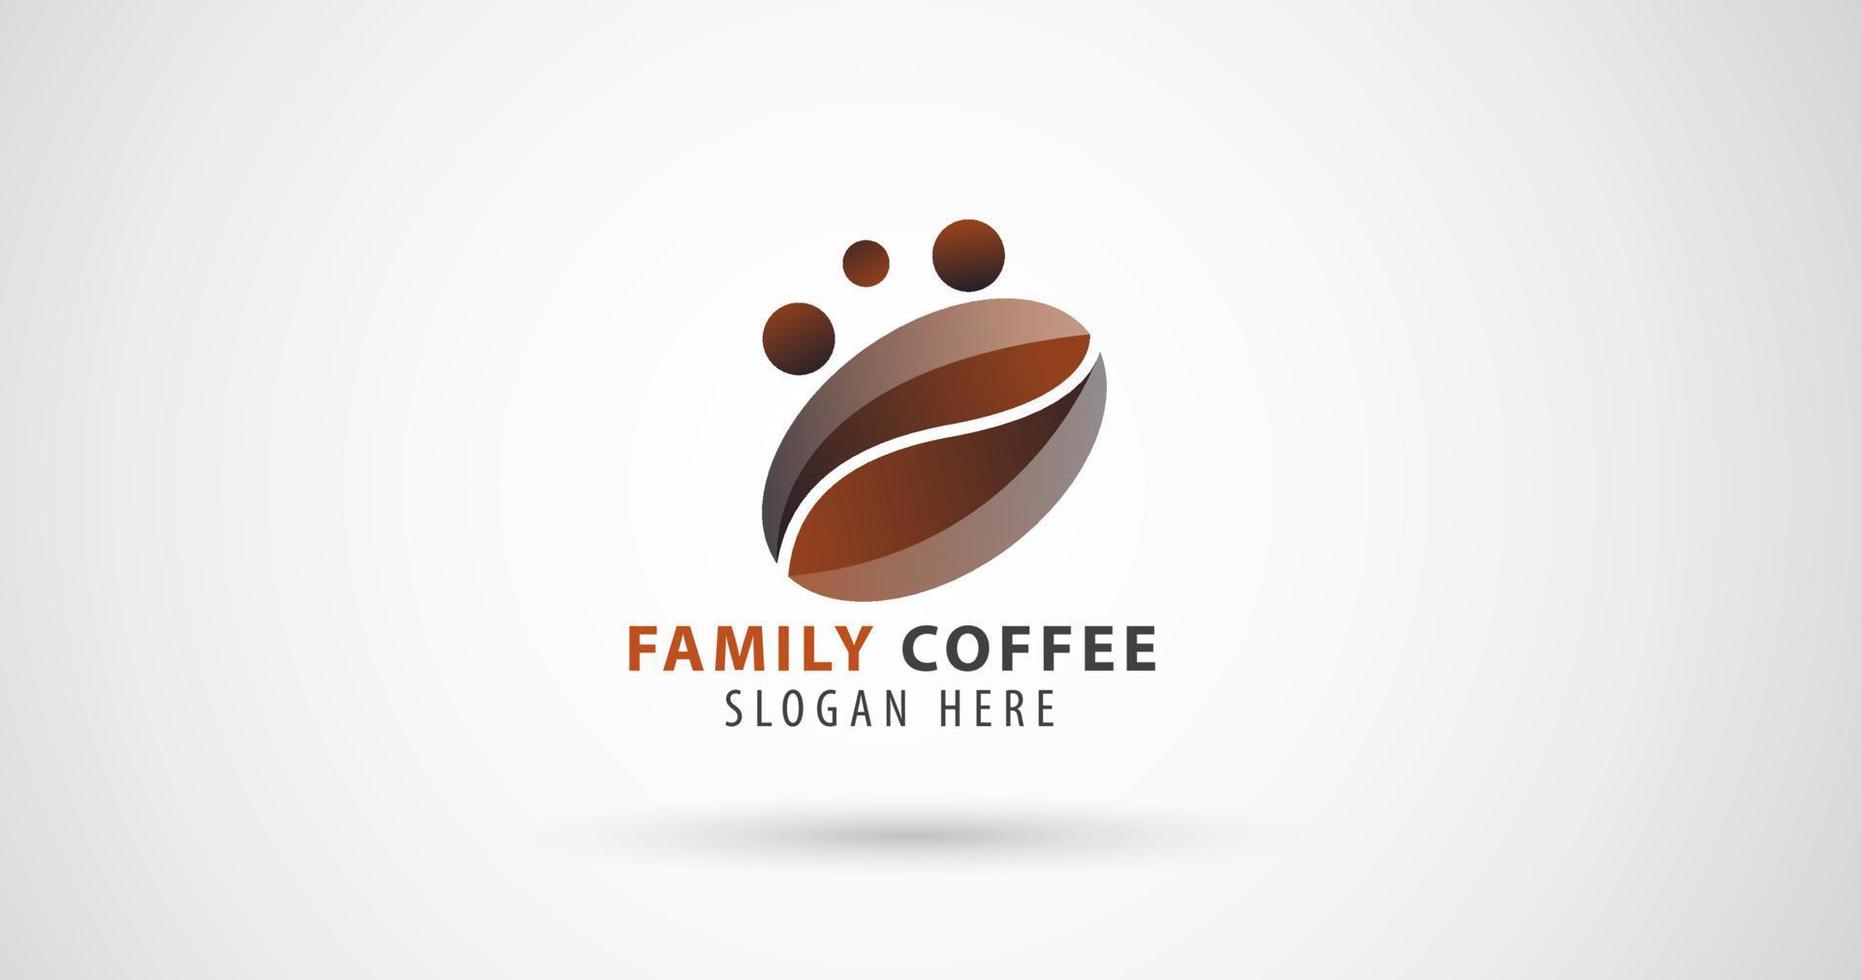 family coffee logo illustration,for your business,vector eps 10 vector